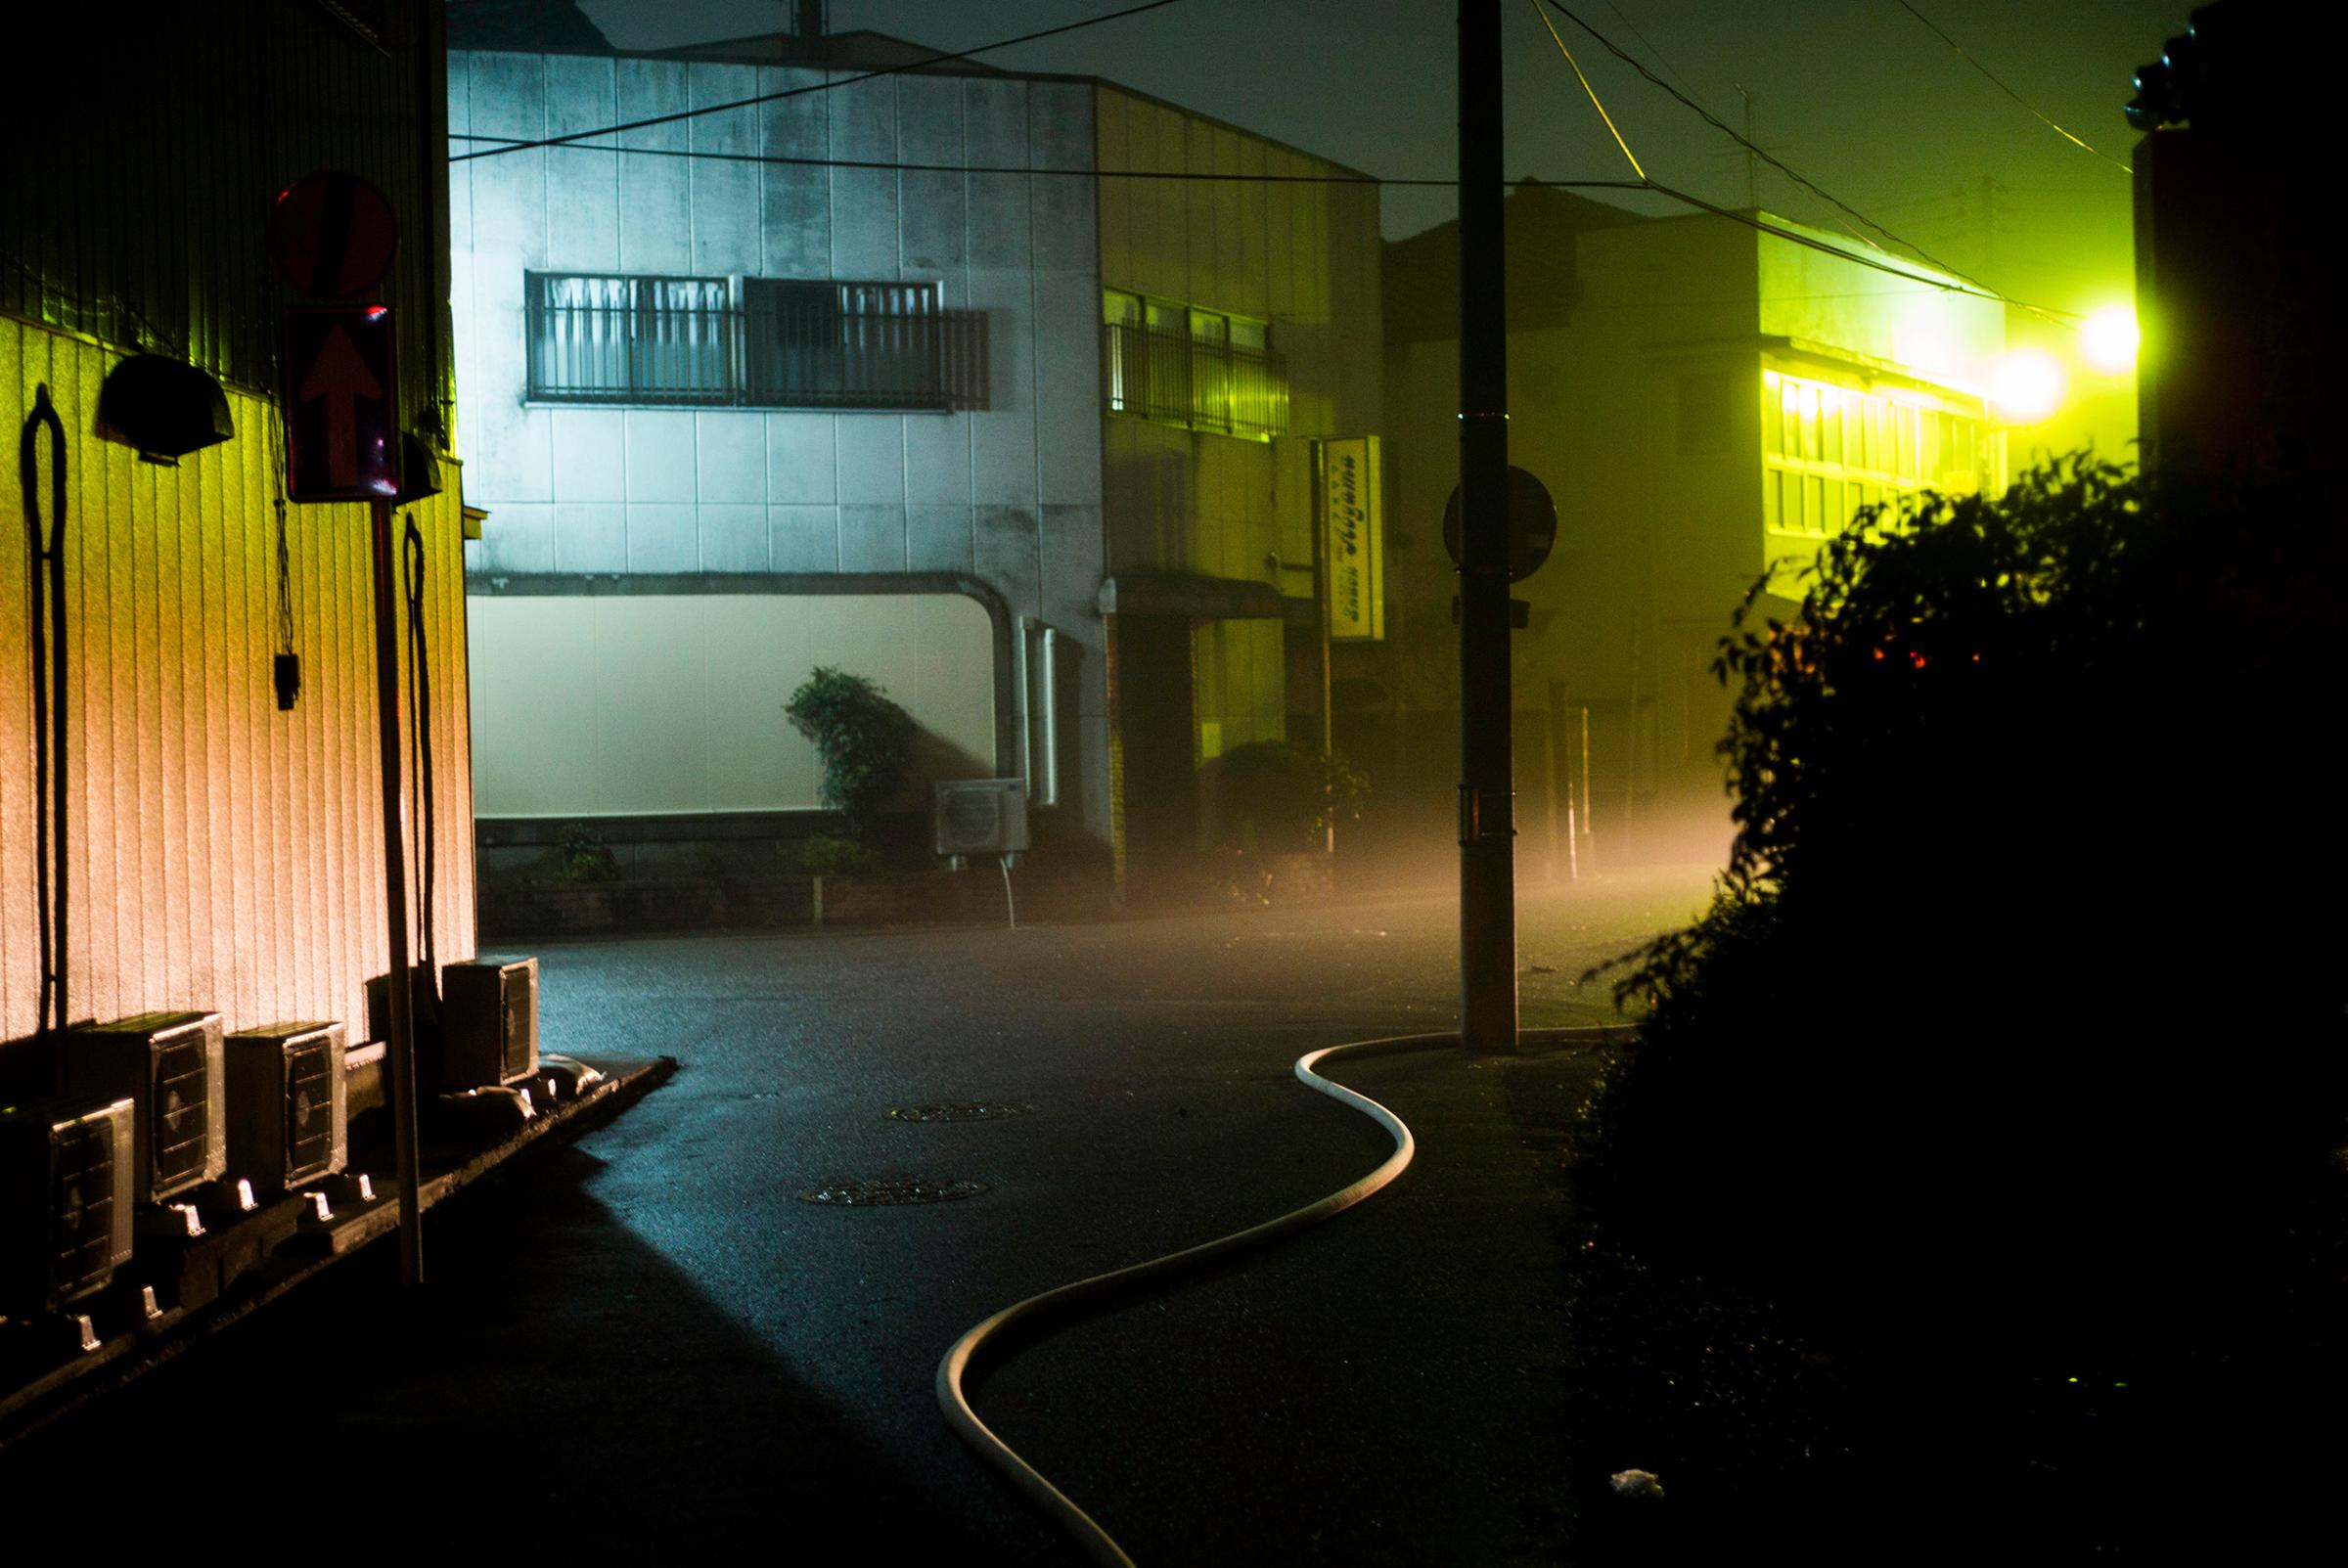 A hose from a fire engine is seen after an incident at a bar in Minamisoma, Fukushima, March 8, 2016.